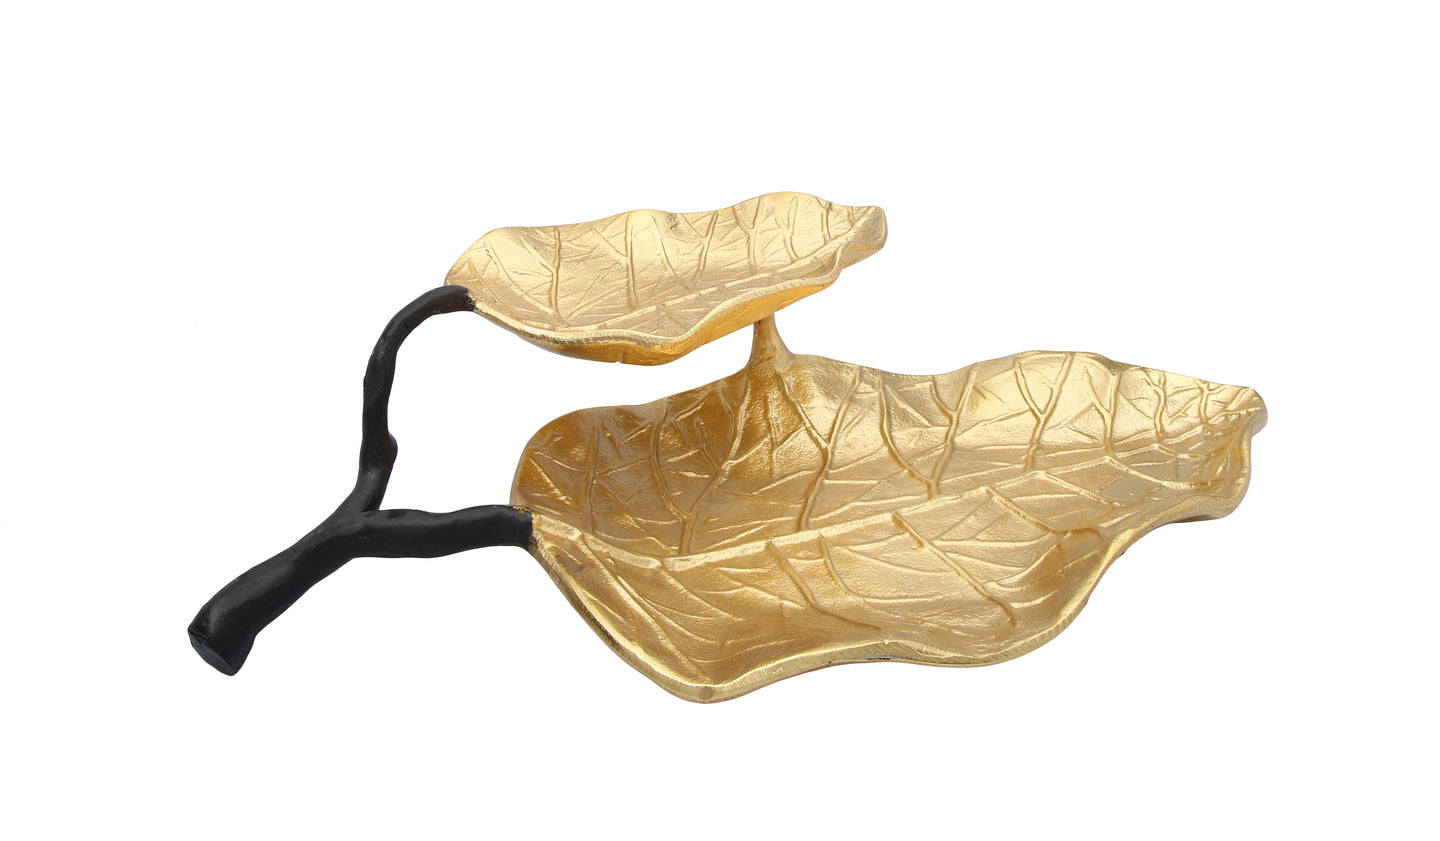 2 Tier Gold Leaf Shaped Dish with Engraved Vein Design